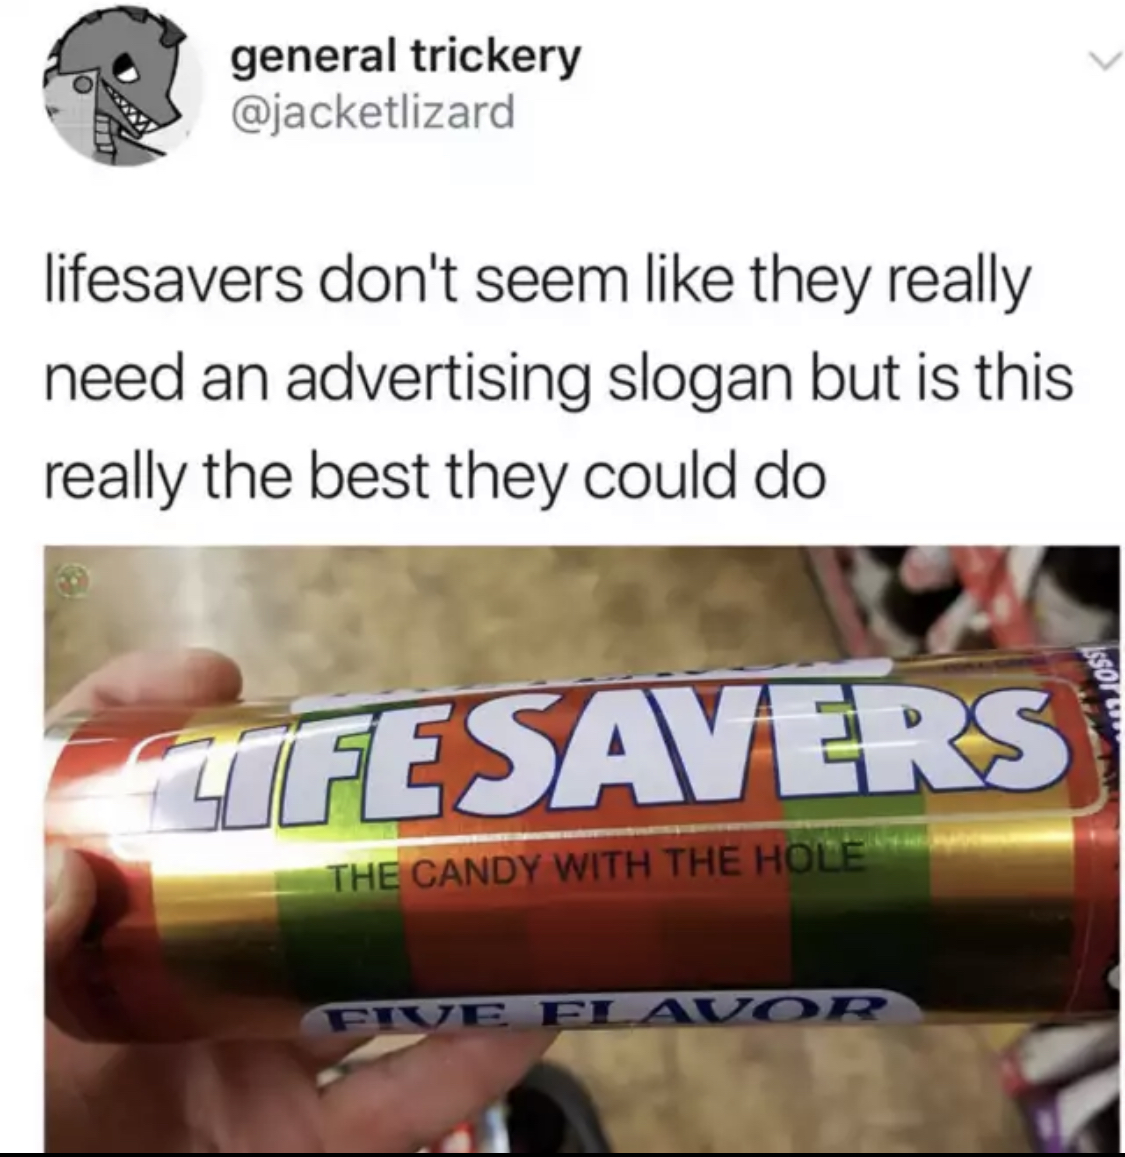 funniest tweets of the week - fetch media - general trickery lifesavers don't seem they really need an advertising slogan but is this really the best they could do Ifesavers The Candy With The Hole Five Flavor